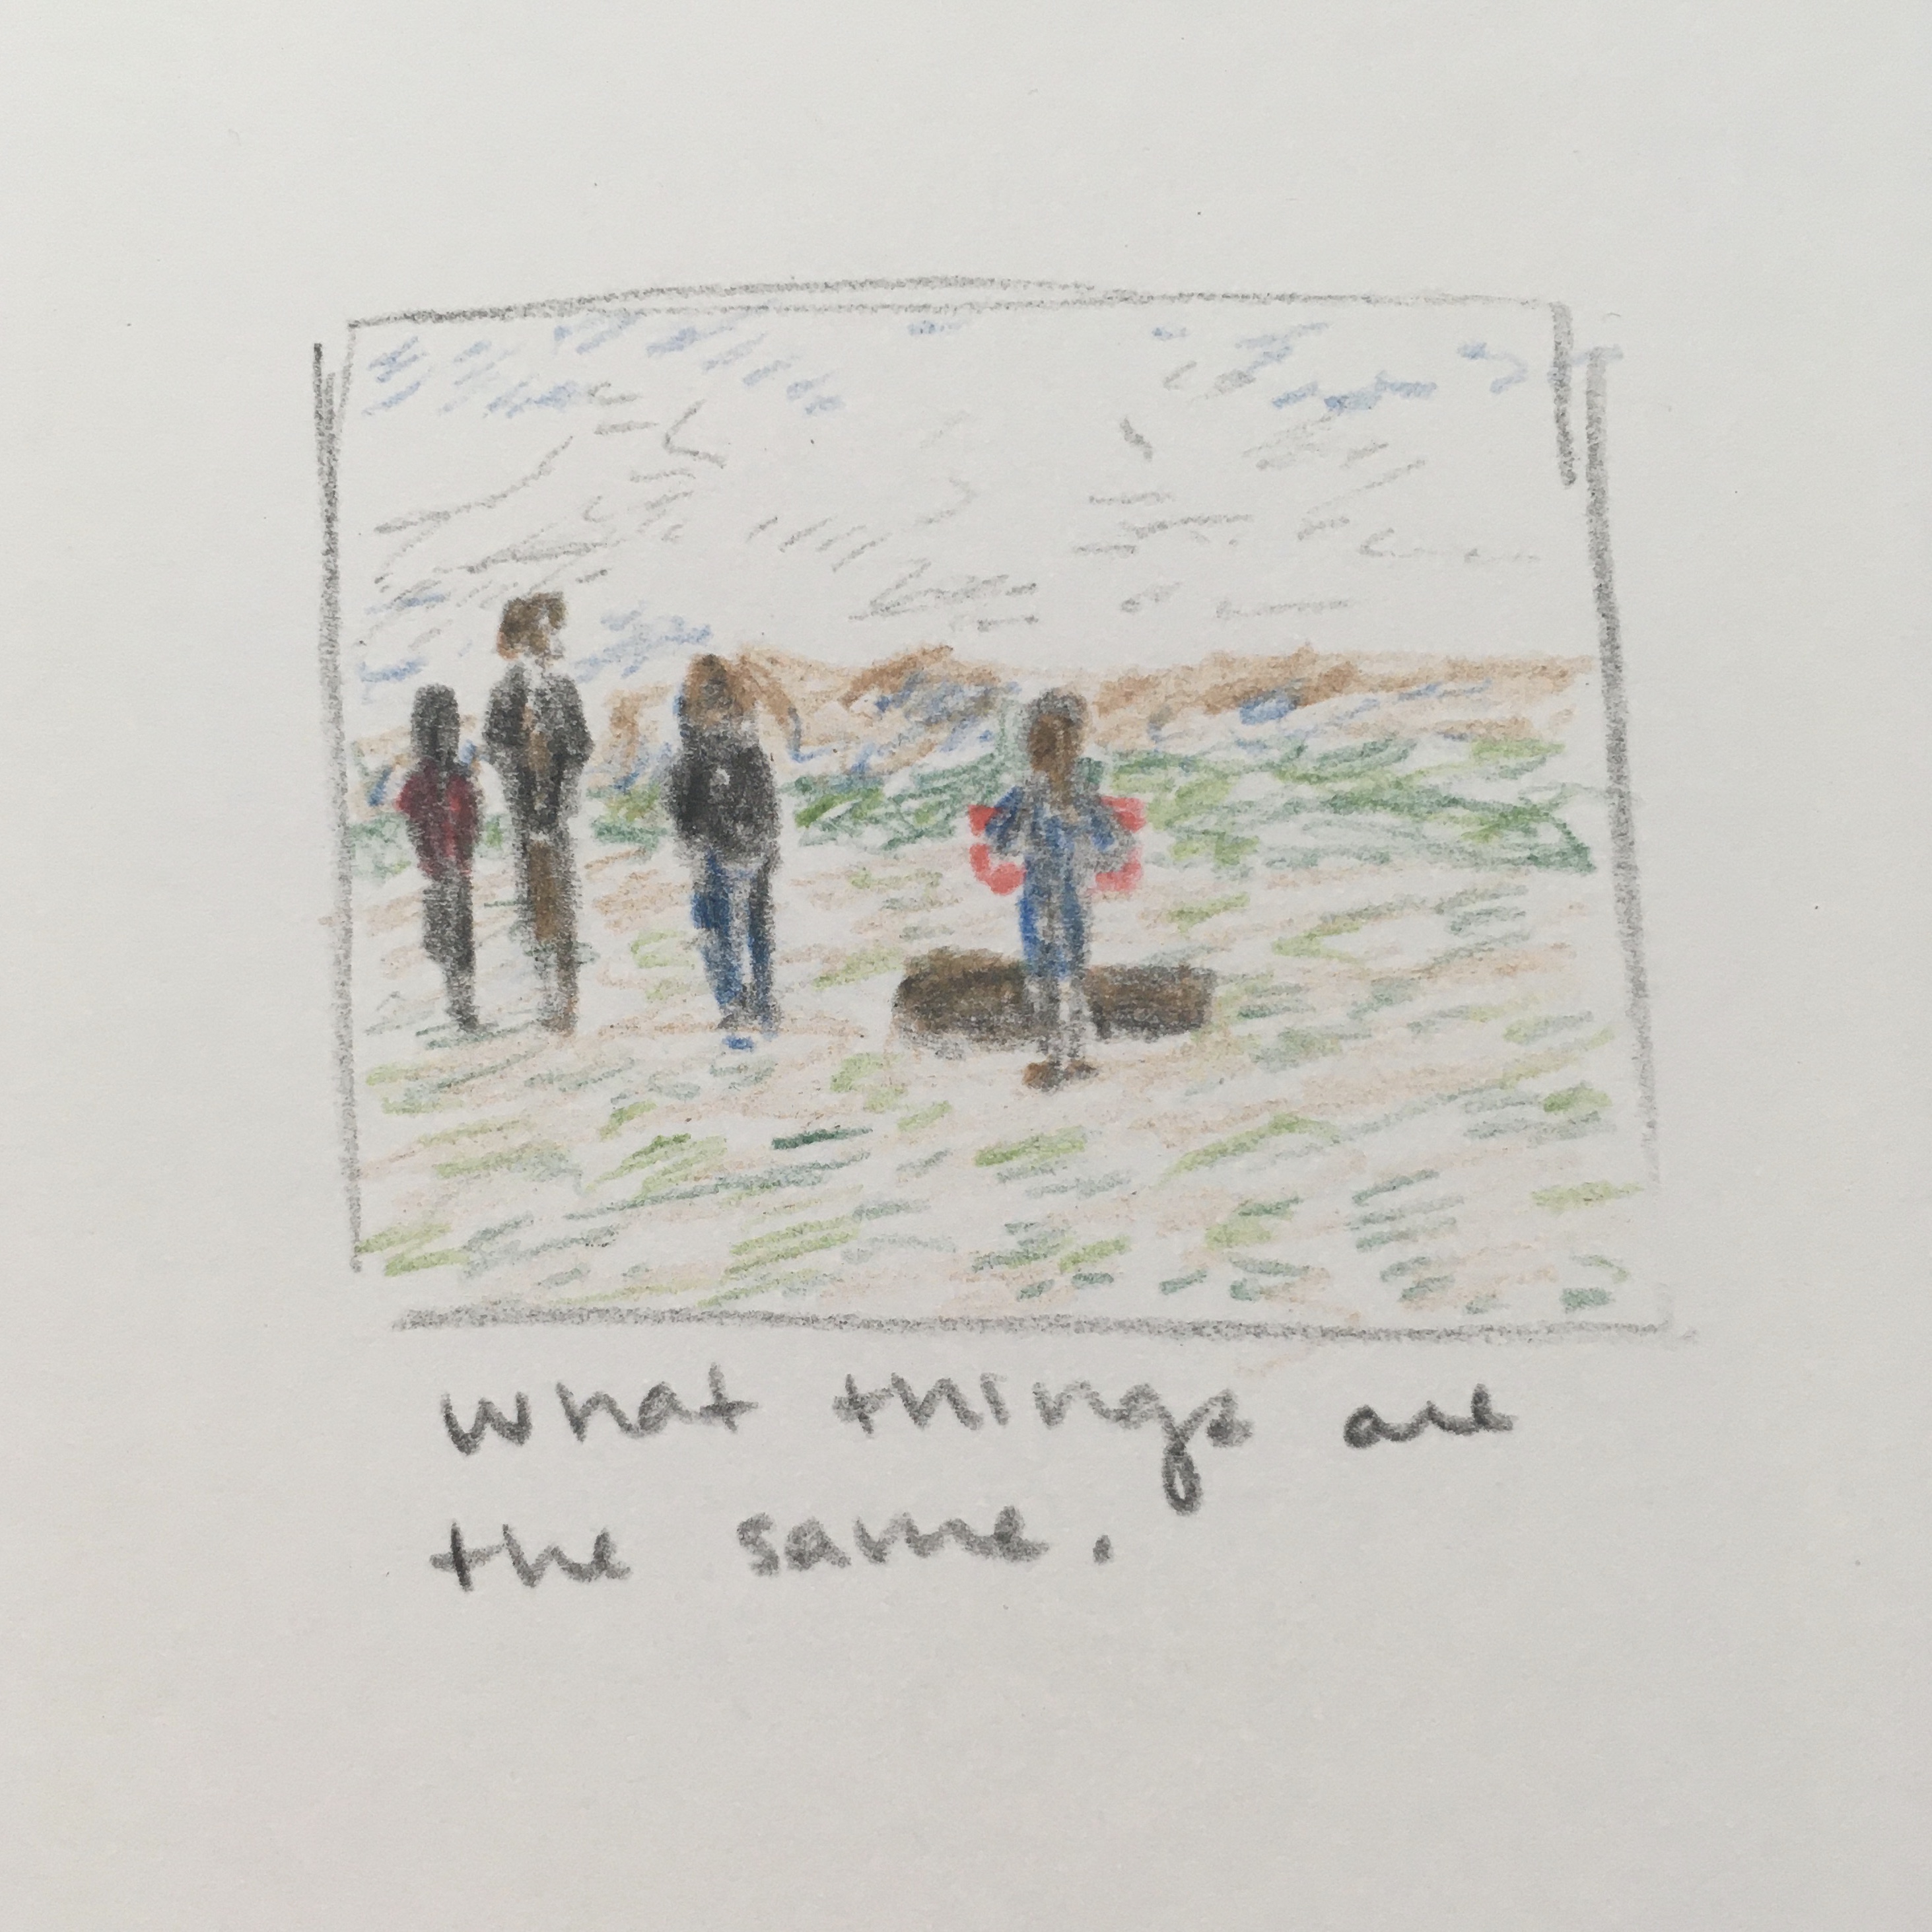 a drawing showing a group of four people standing outdoors, somewhat far away. in front of one figure is a dark shape, left purposefully vague. perhaps a hole, a log, a towel on the ground.